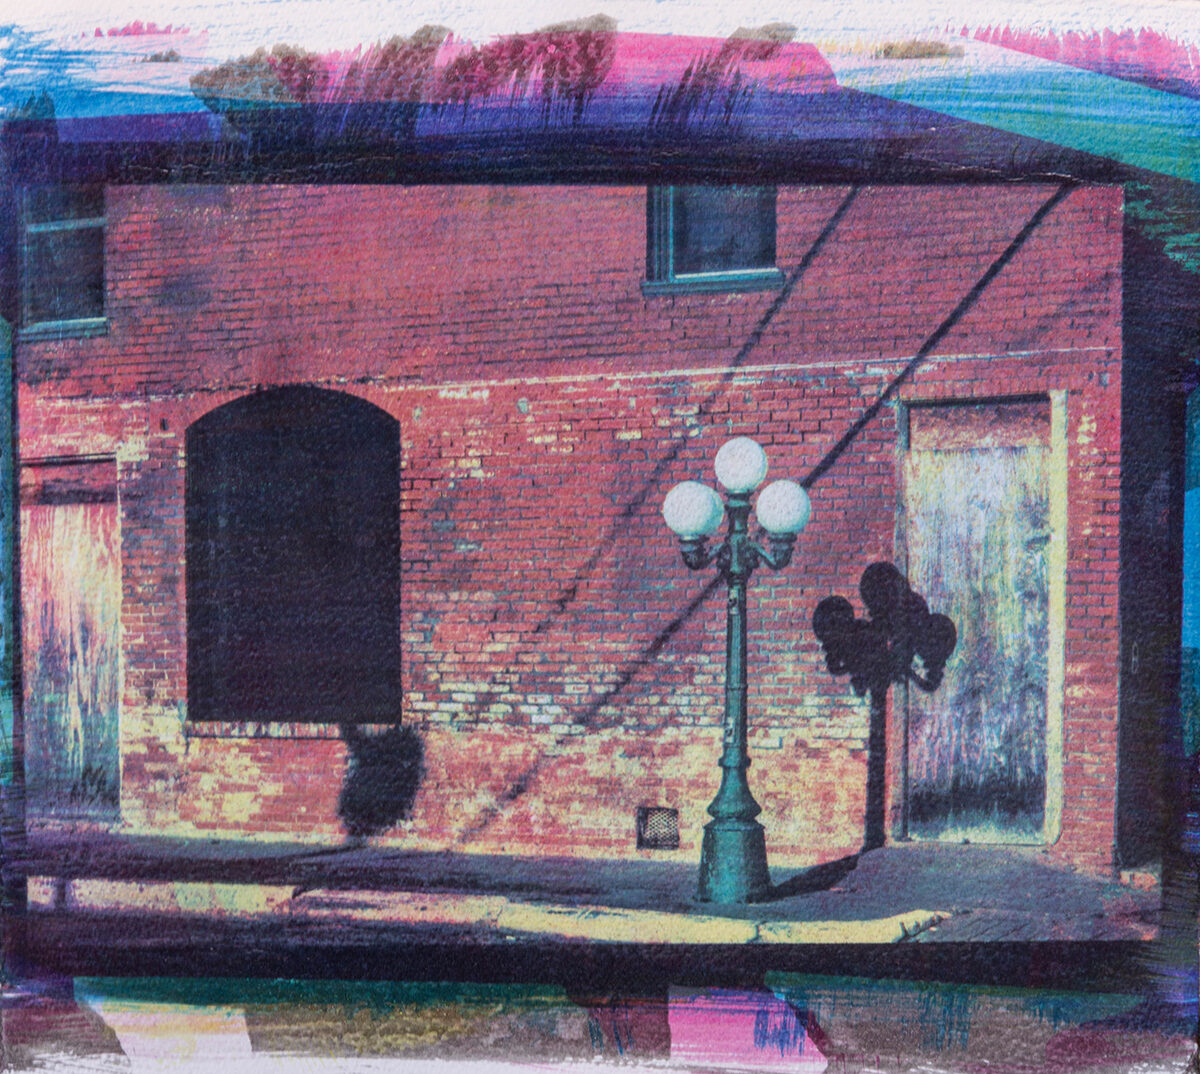 Colored photograph of a lampstand on a sidewalk in front of a brick building.